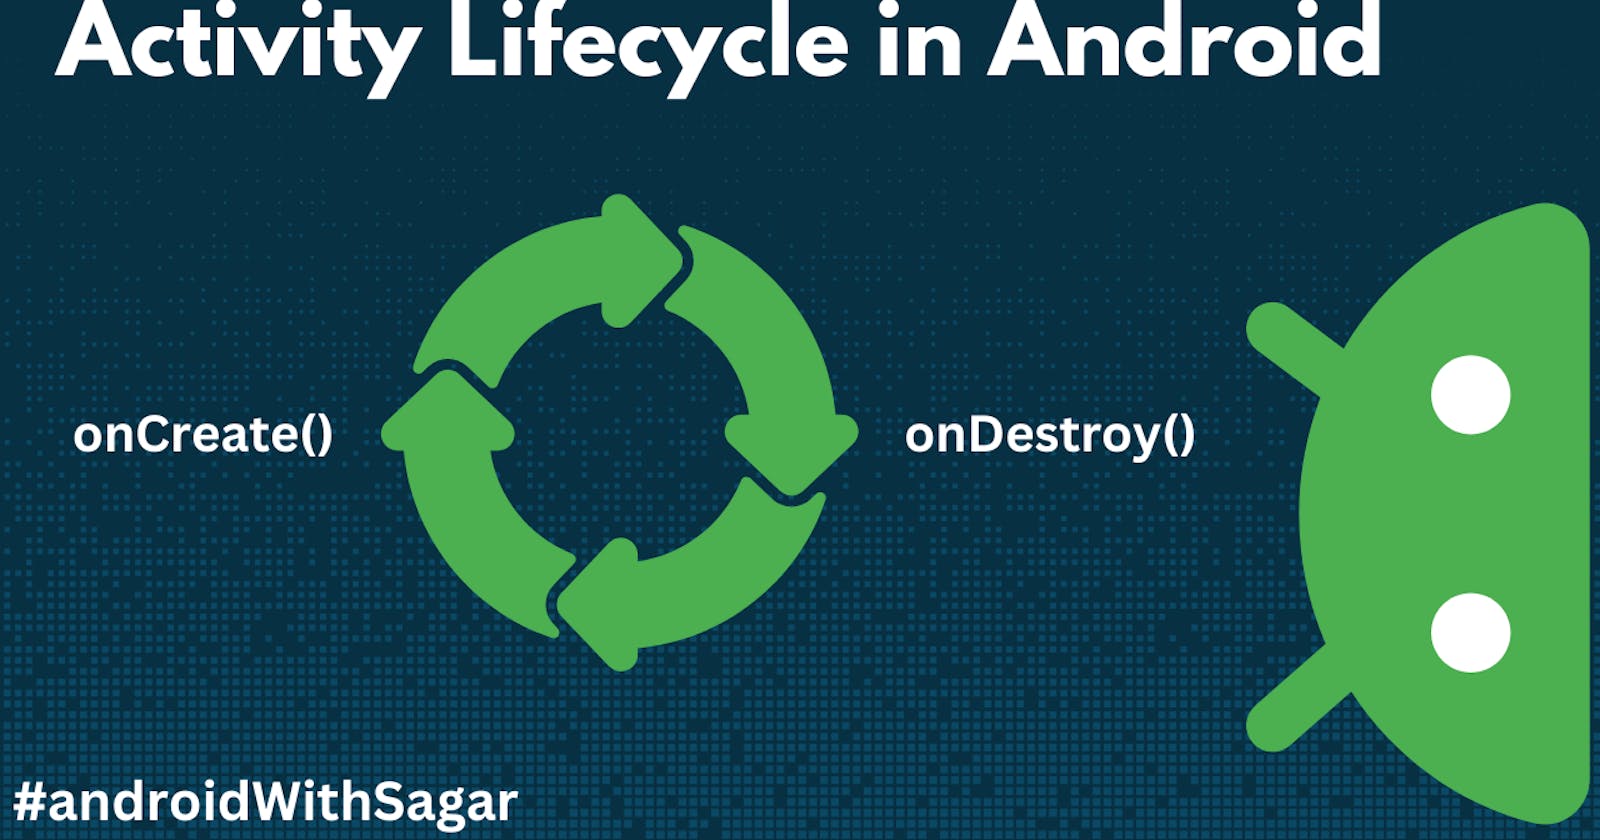 The Activity Lifecycle in Android